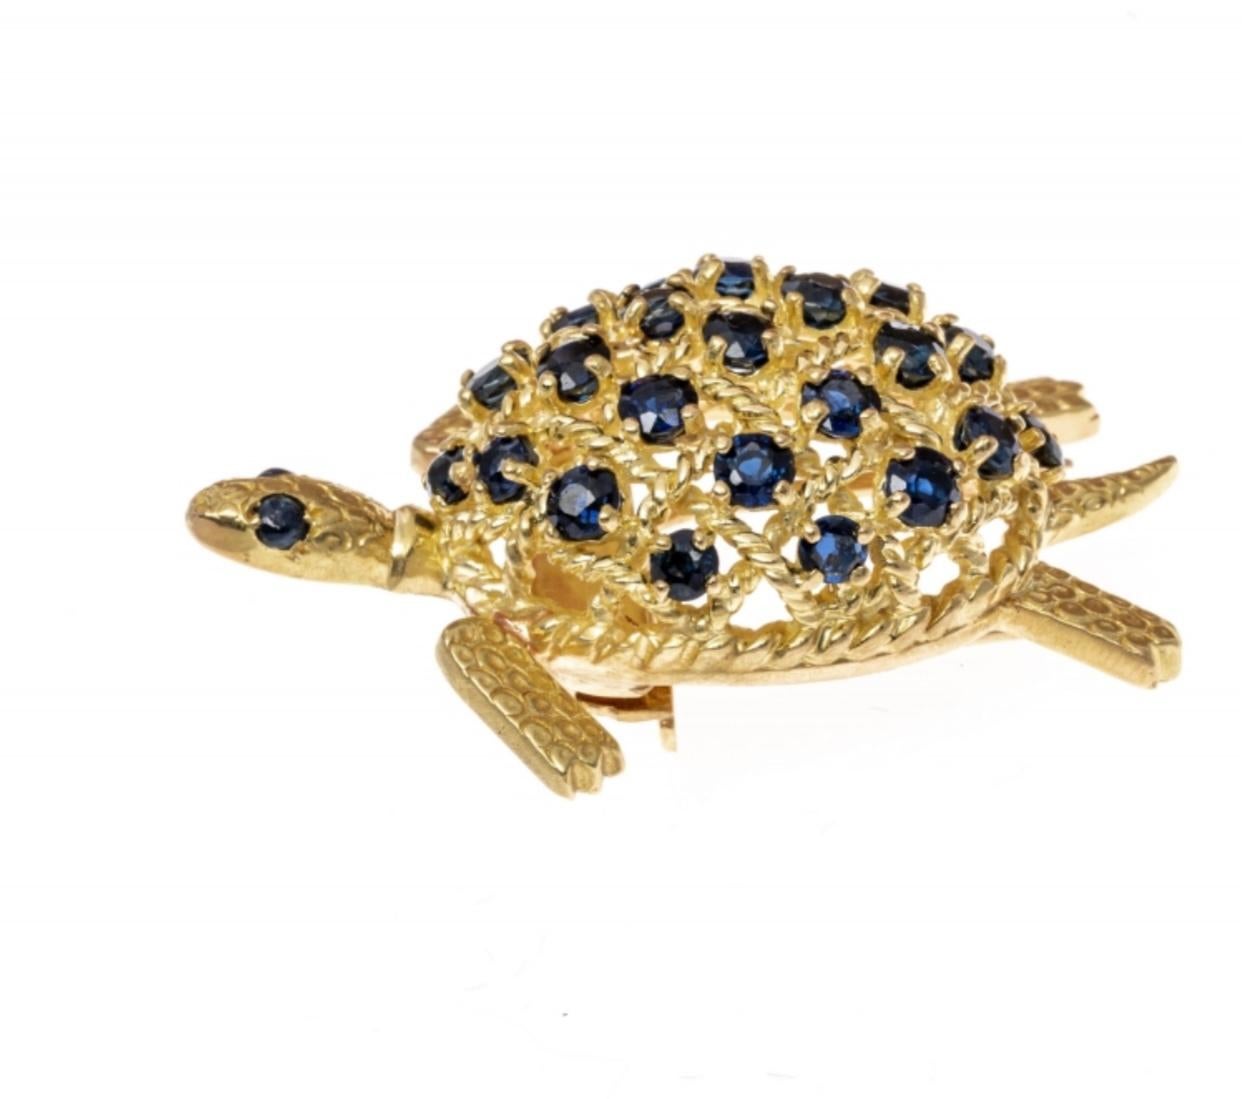 This charming and whimsical brooch is a turtle, set with a checkerboard of round faceted, medium to dark navy blue, sapphire stones, approximately 1.85 TCW, and prong set in between twisted gold criss-crossing wires. The head, feet and tail of the